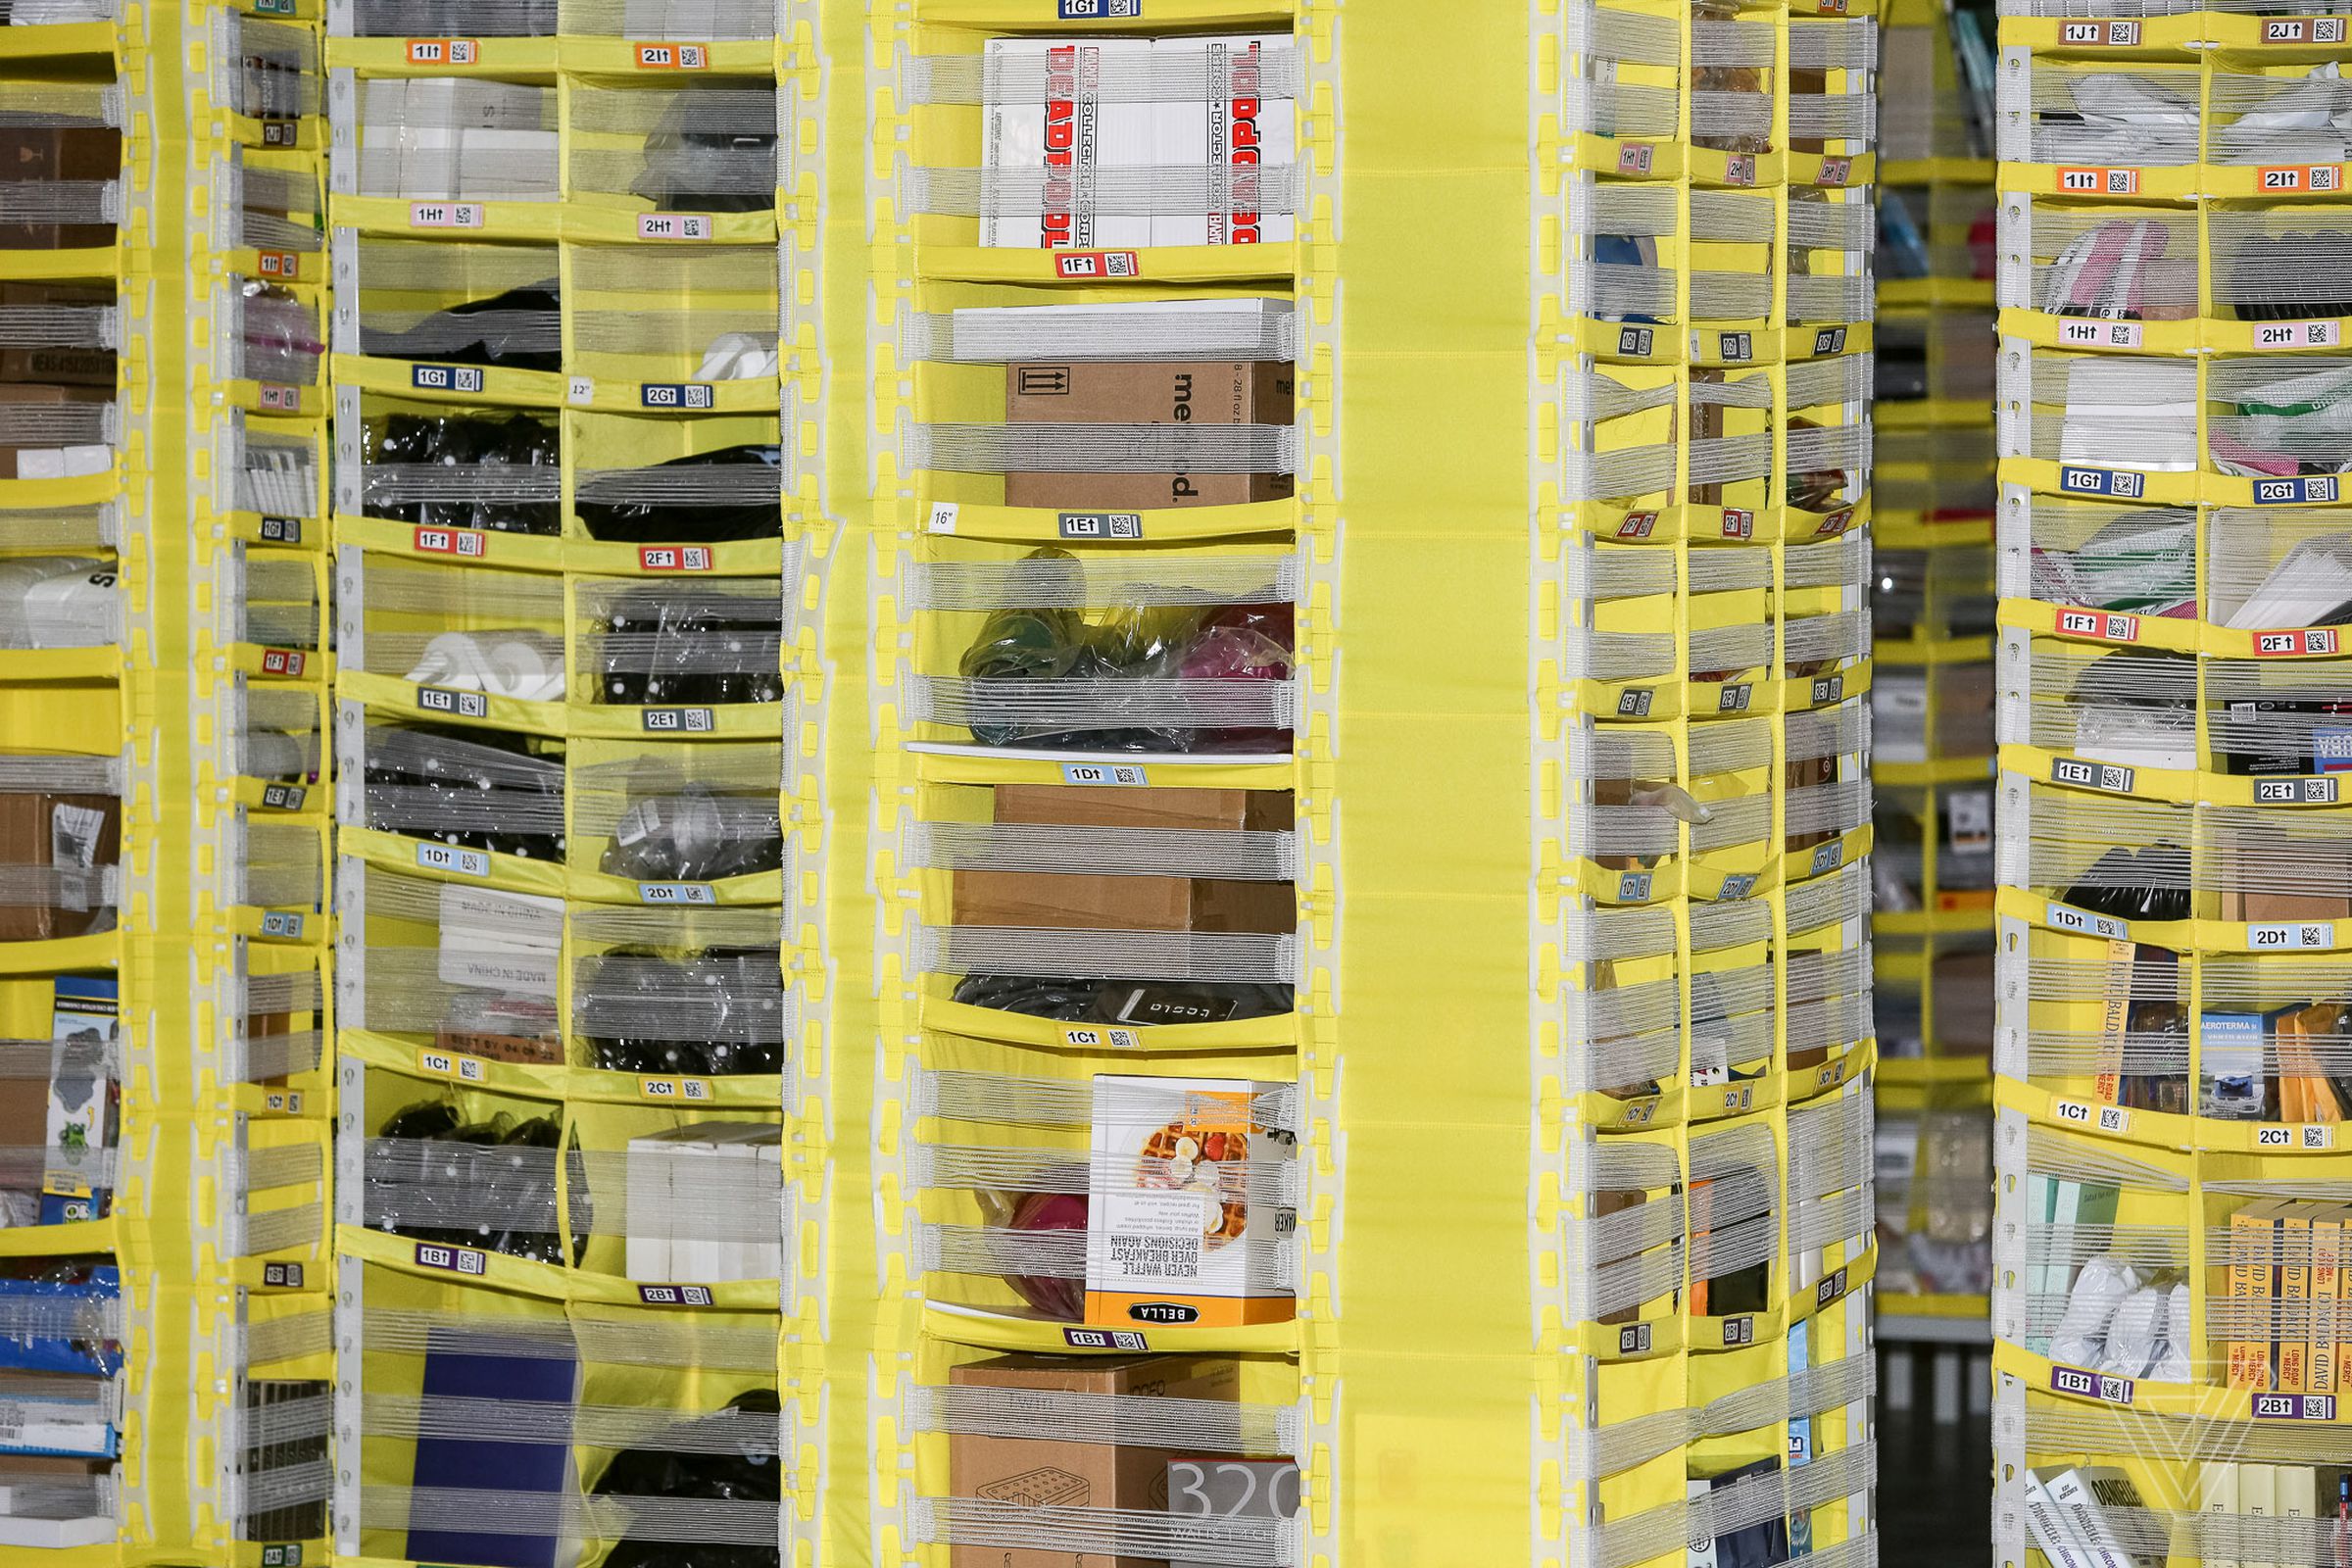 Robots move products in the Amazon Fulfillment Center on Prime Day in Shakopee, Minn., on Monday, July 15th, 2019.